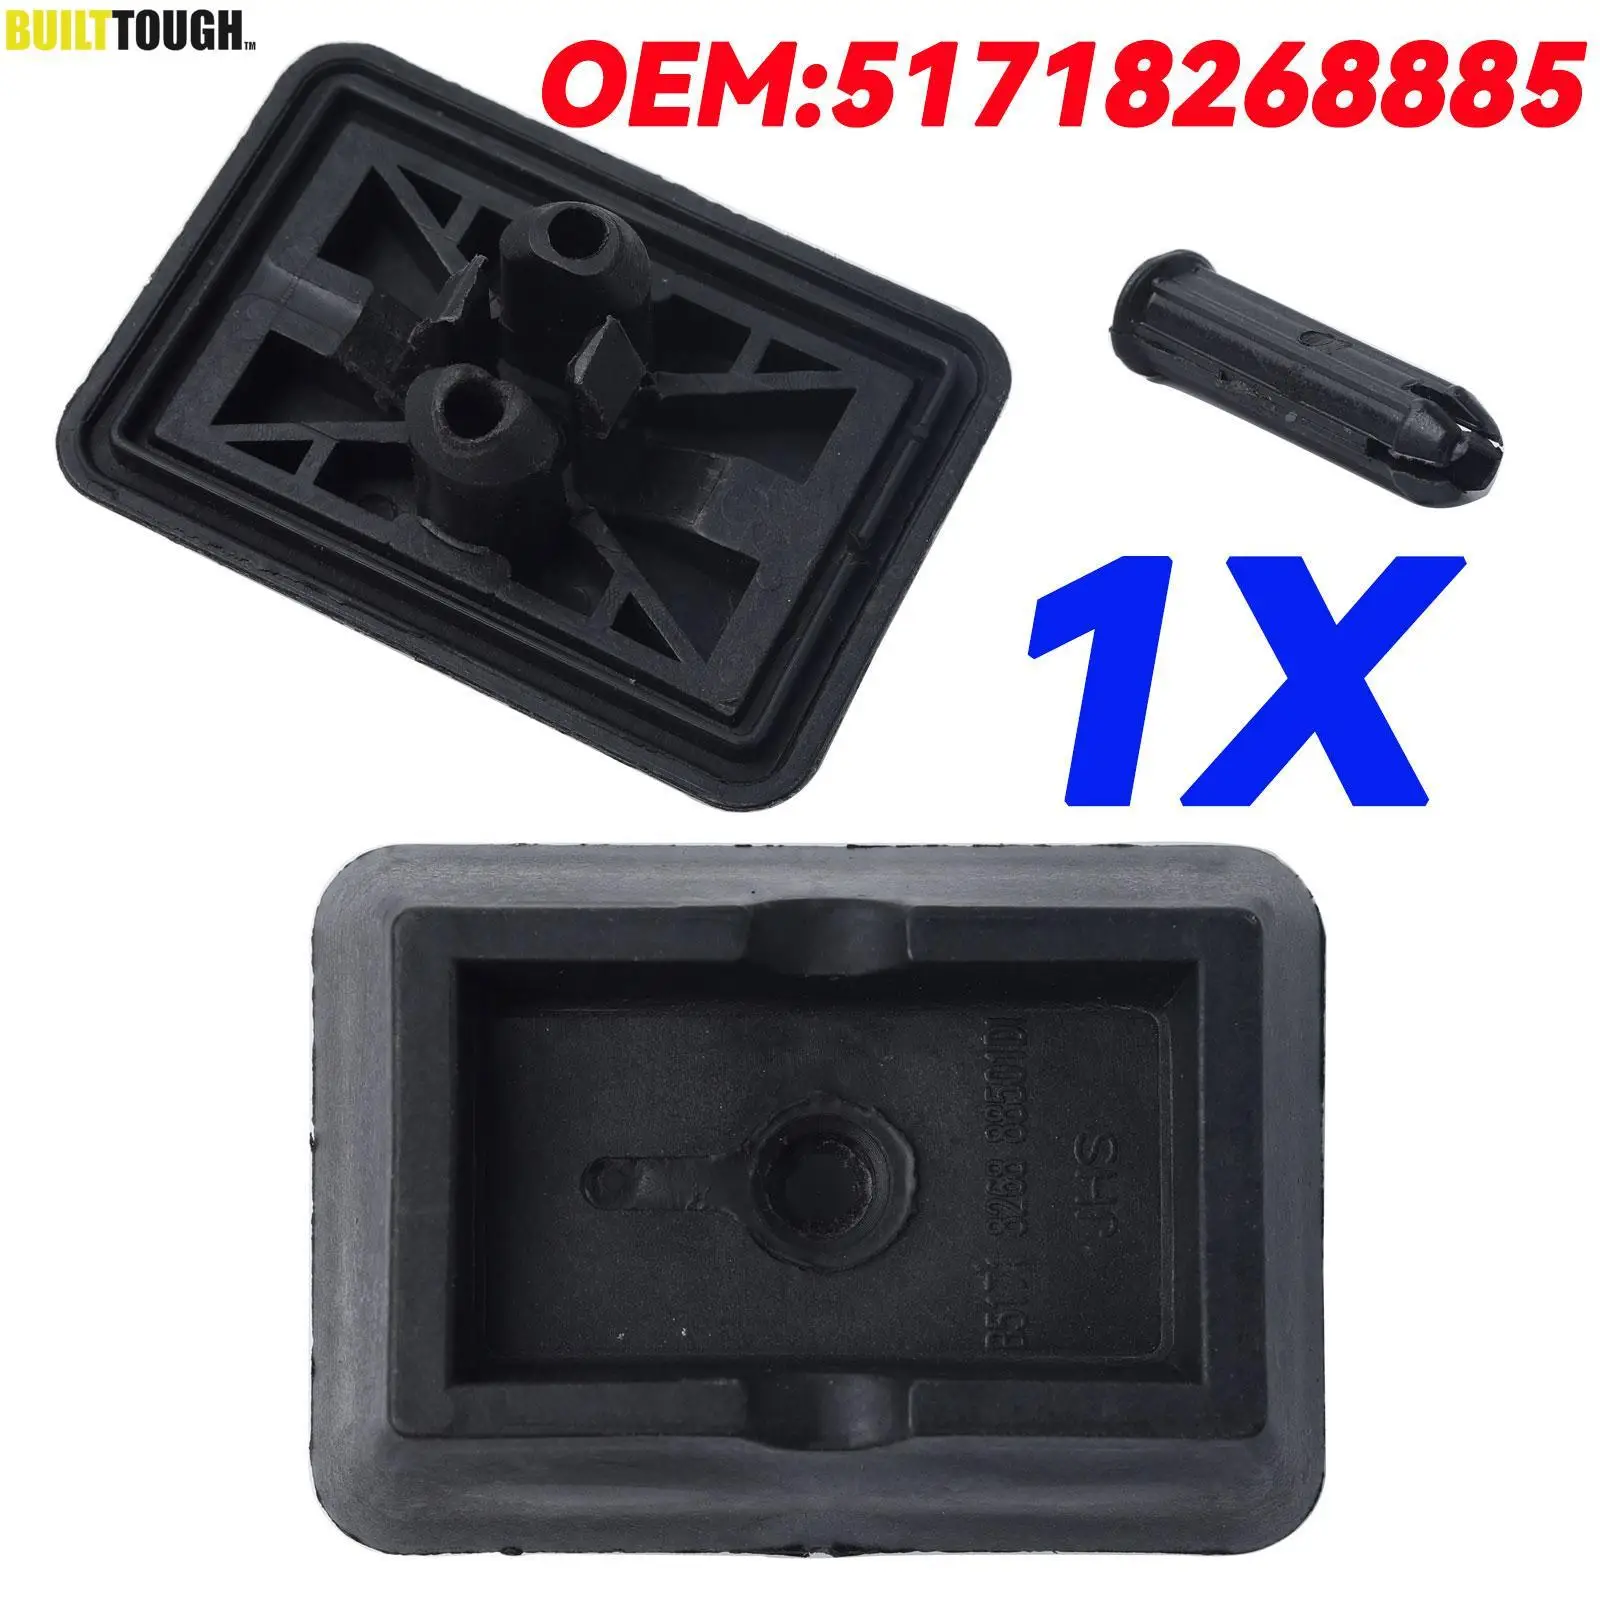 

Car Jack Point Pad Under Adapter Support Mount Lift 51718268885 for BMW 3 Series E46 X3 E83 E63 E64 E65 E66 E67 Z4 E85 E86 E89